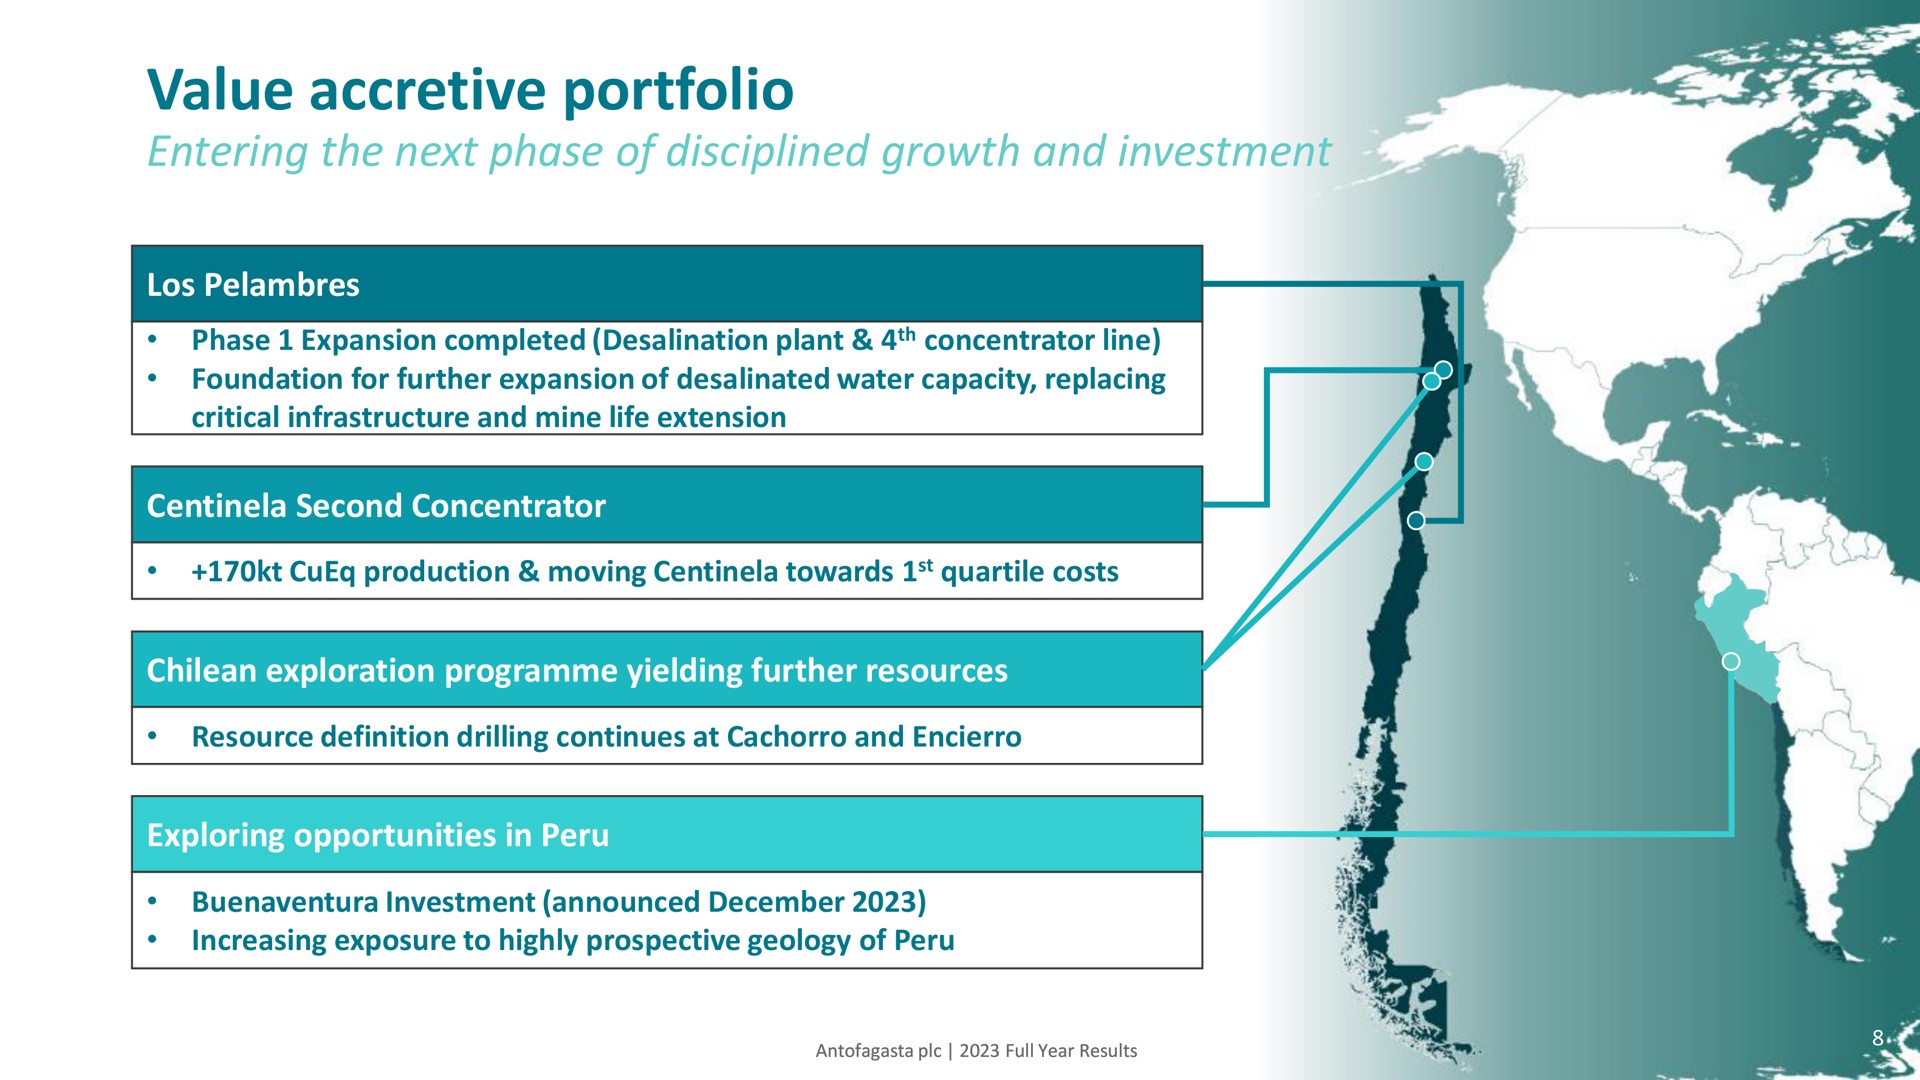 value accretive portfolio entering the next phase of disciplined growth and investment | Antofagasta